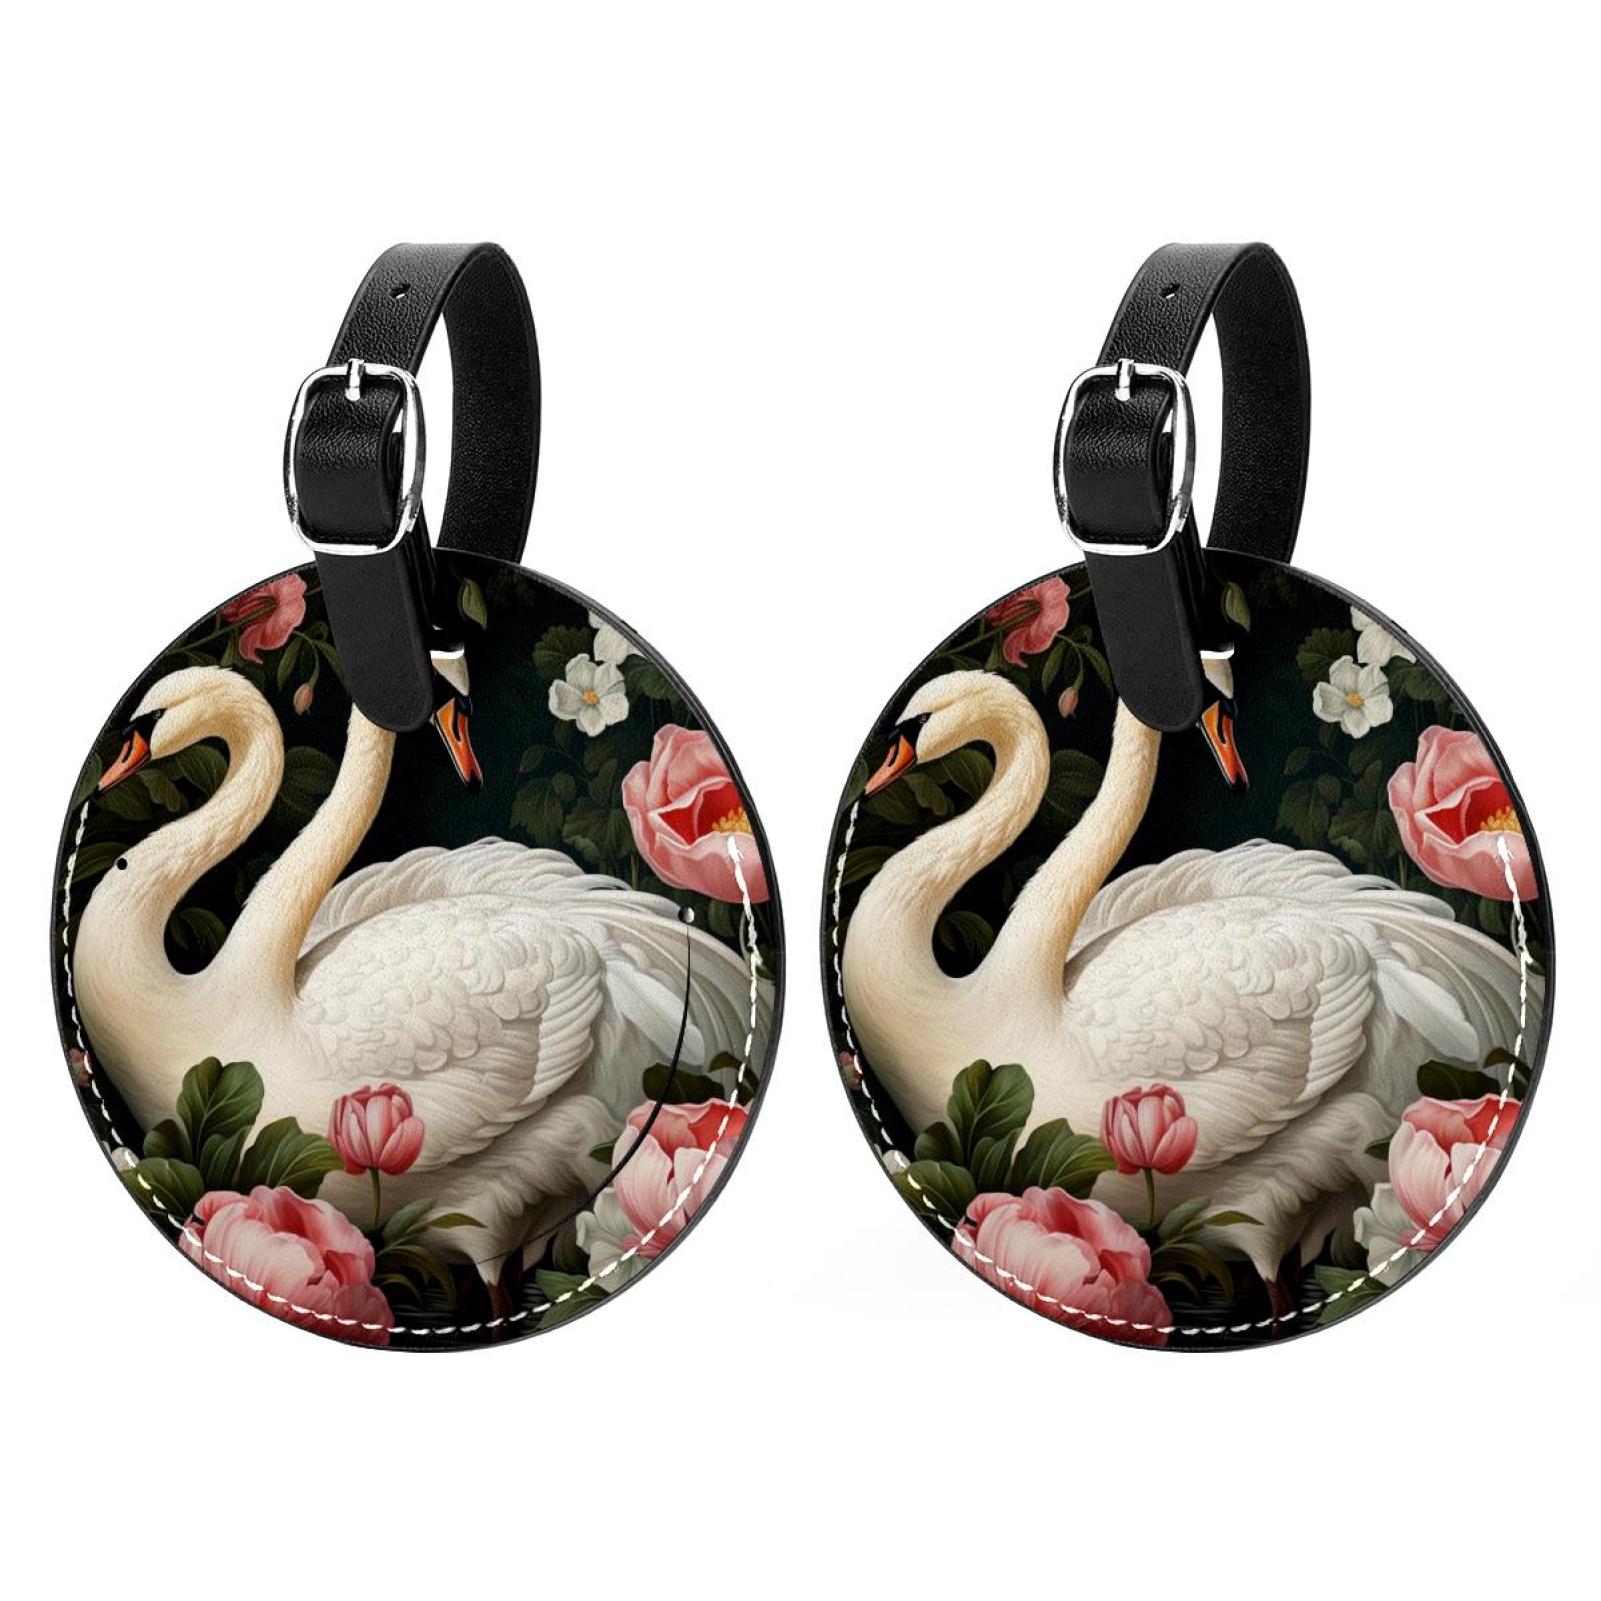 Swan 2pcs PU Leather Round Bag Tags Suitcase Handbag Tags with Privacy ...